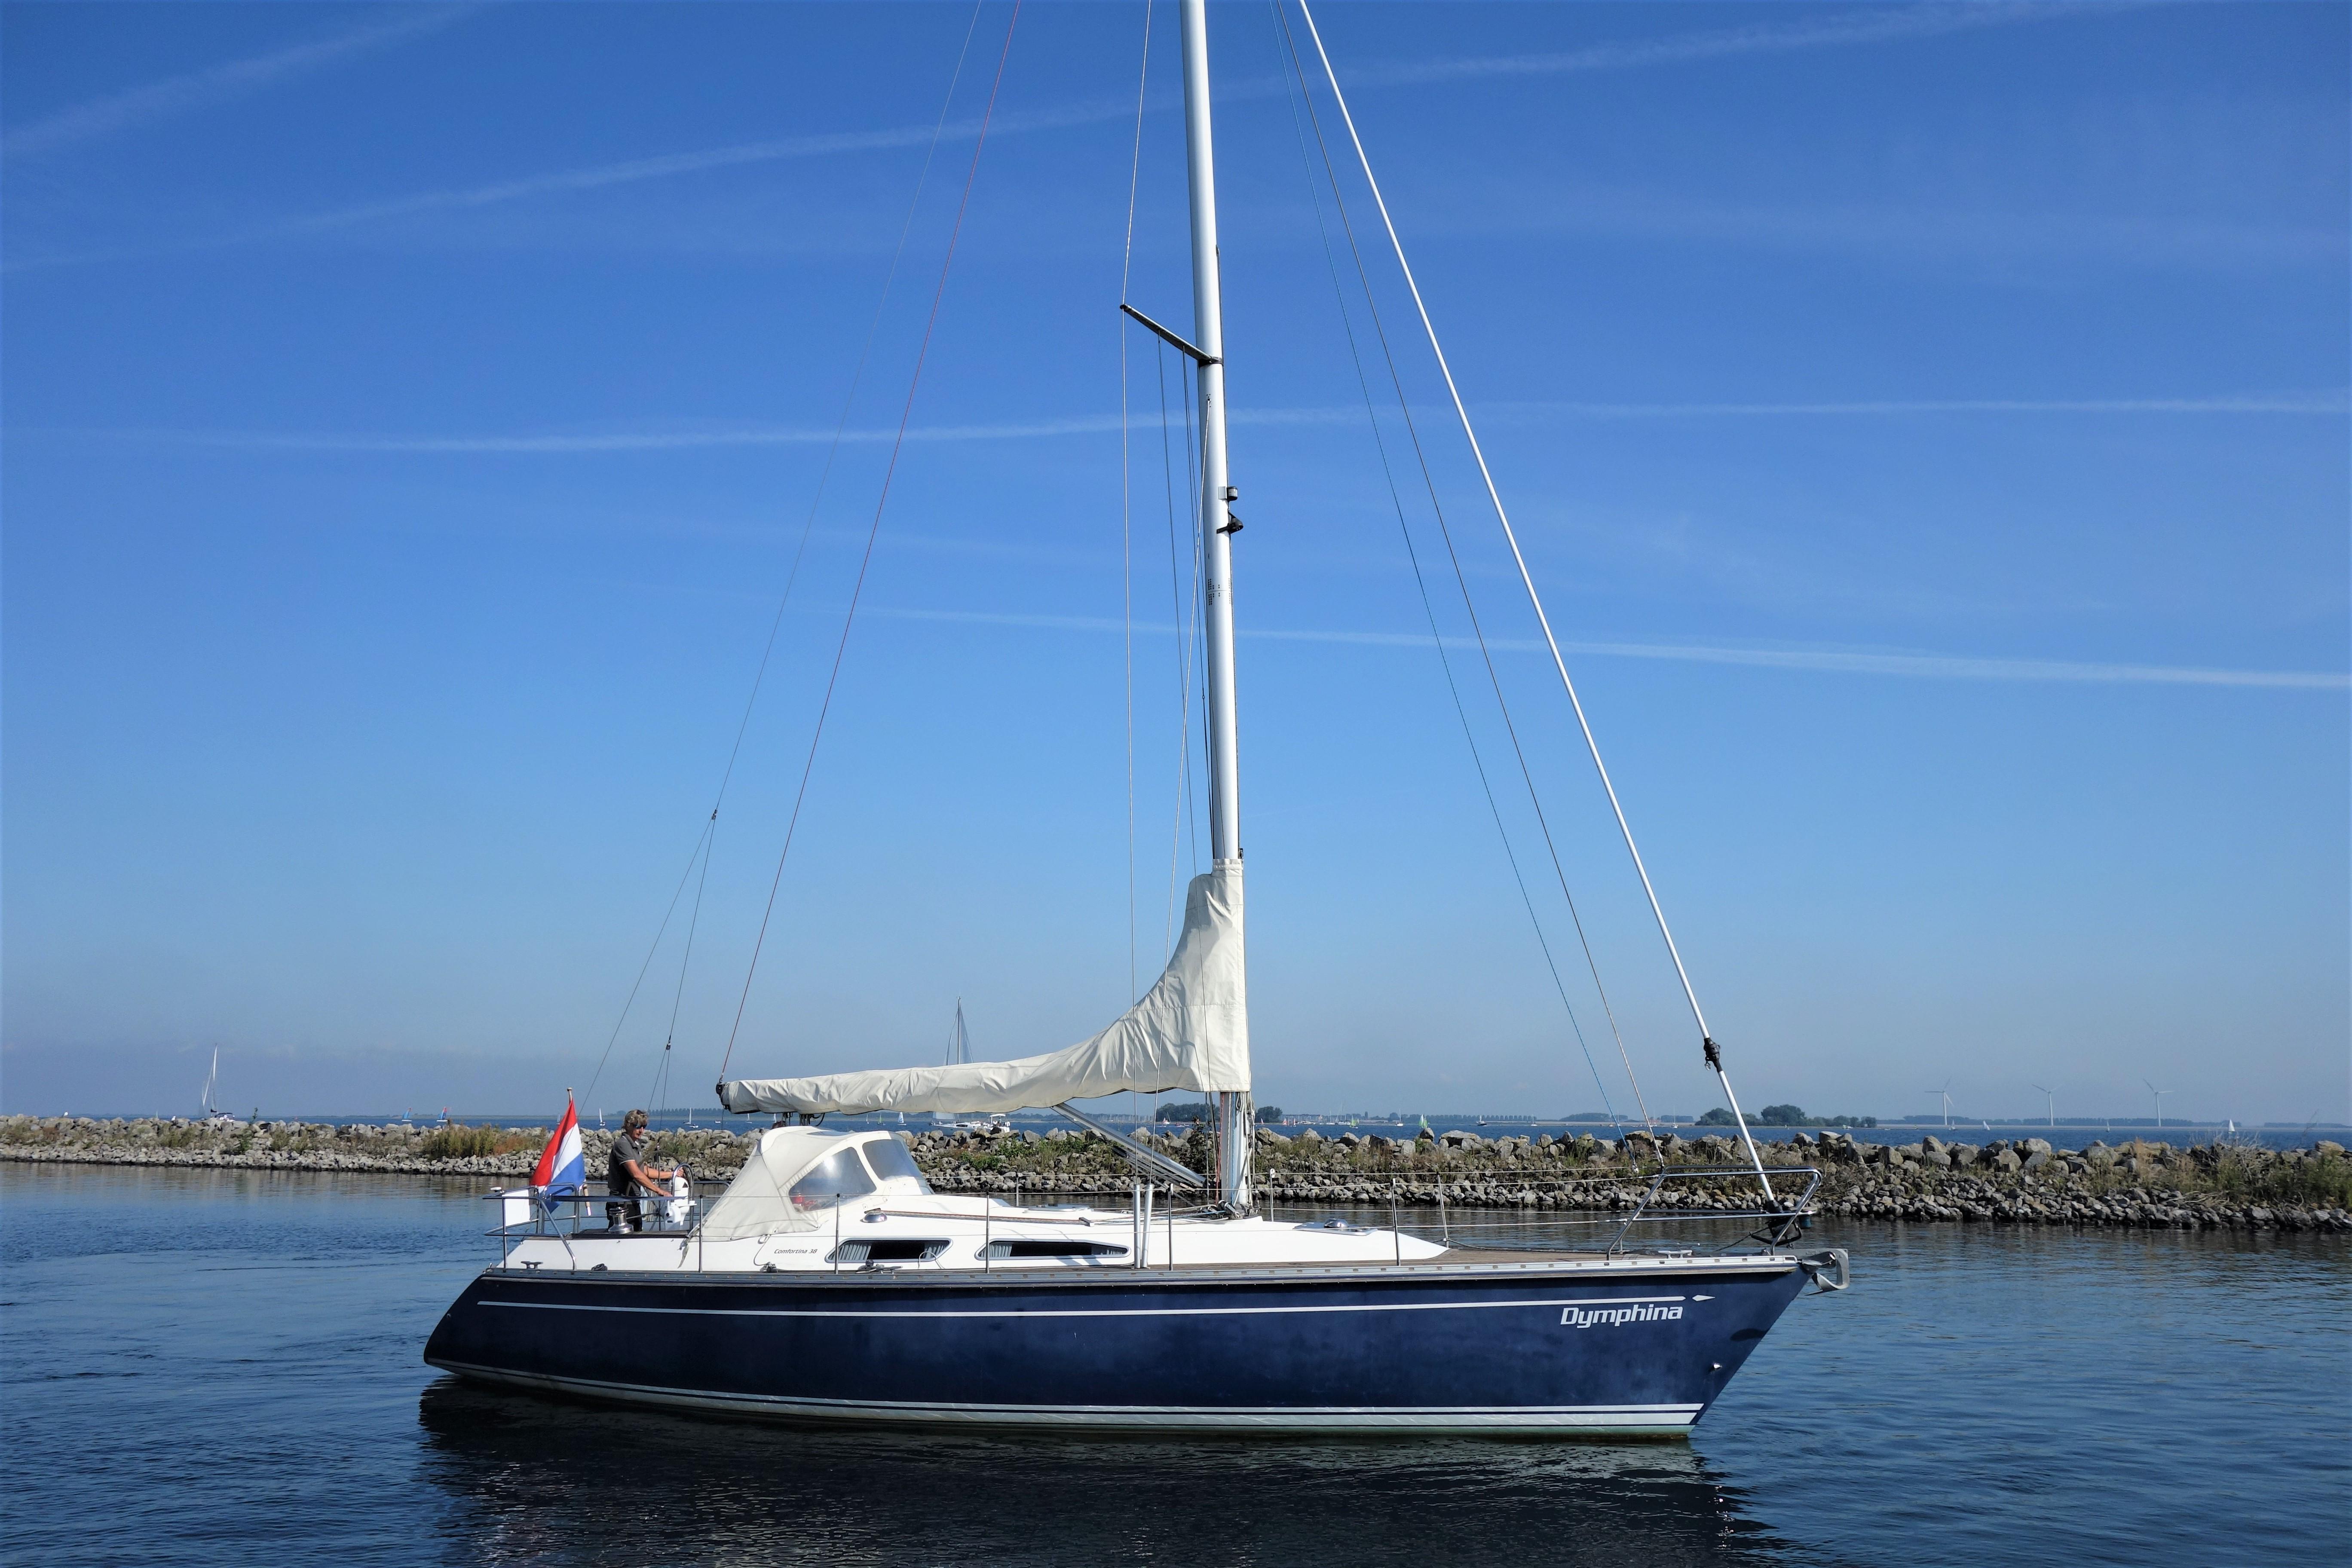 comfortina yacht for sale